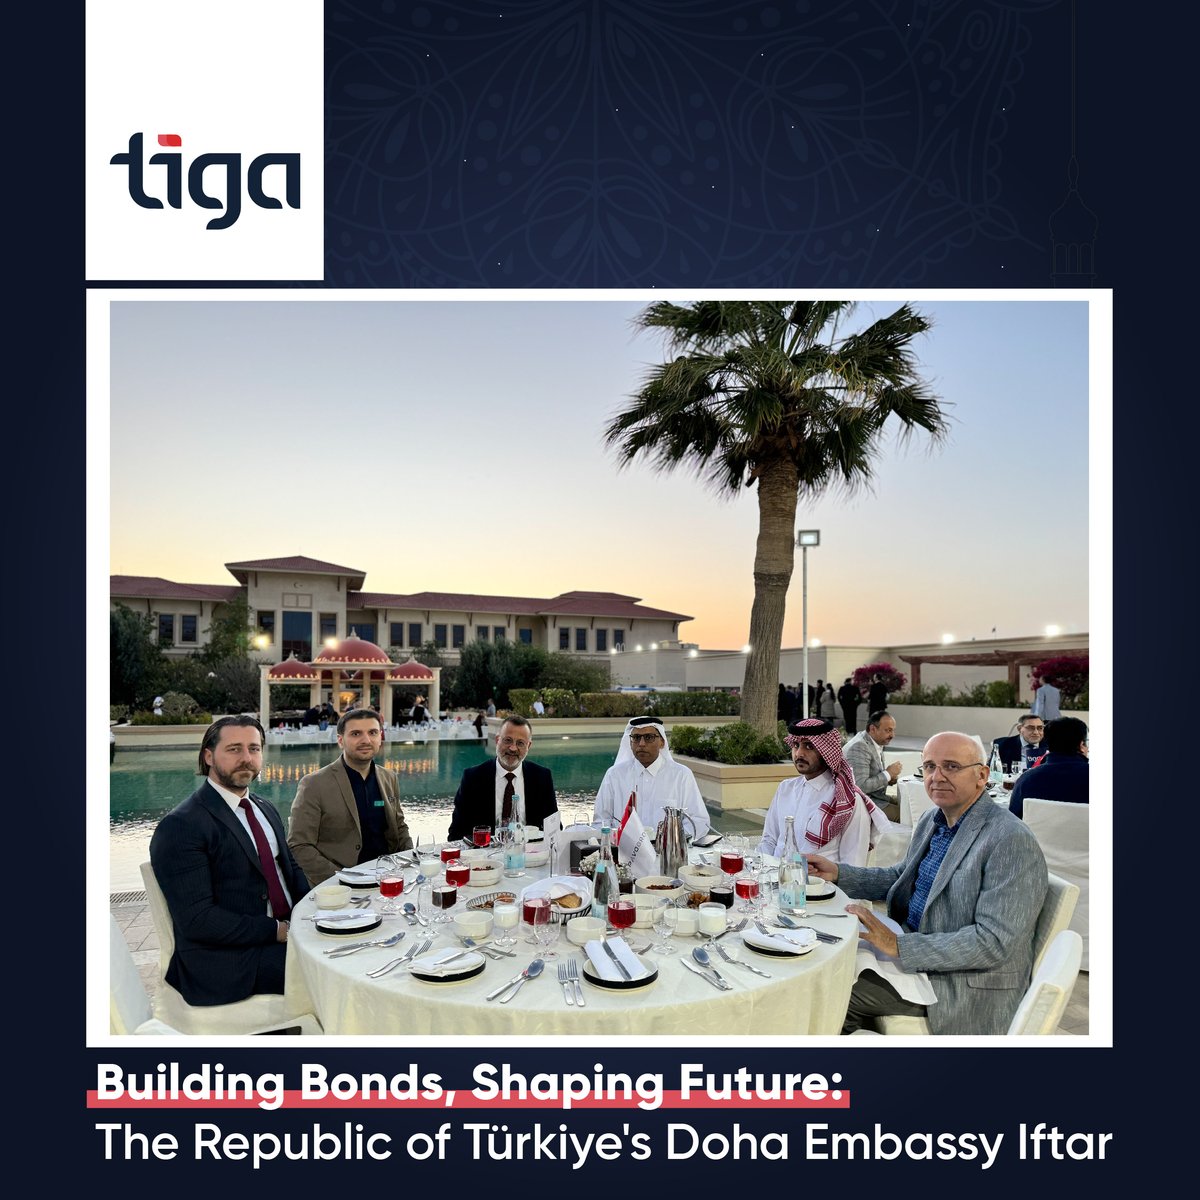 We were honored to sponsor the #iftar event at the Republic of Türkiye's Doha Embassy. It was a truly enriching experience to be part of this occasion and it resonates with our values of community and togetherness. We extend our deepest gratitude to Ambassador Dr. M. Mustafa…